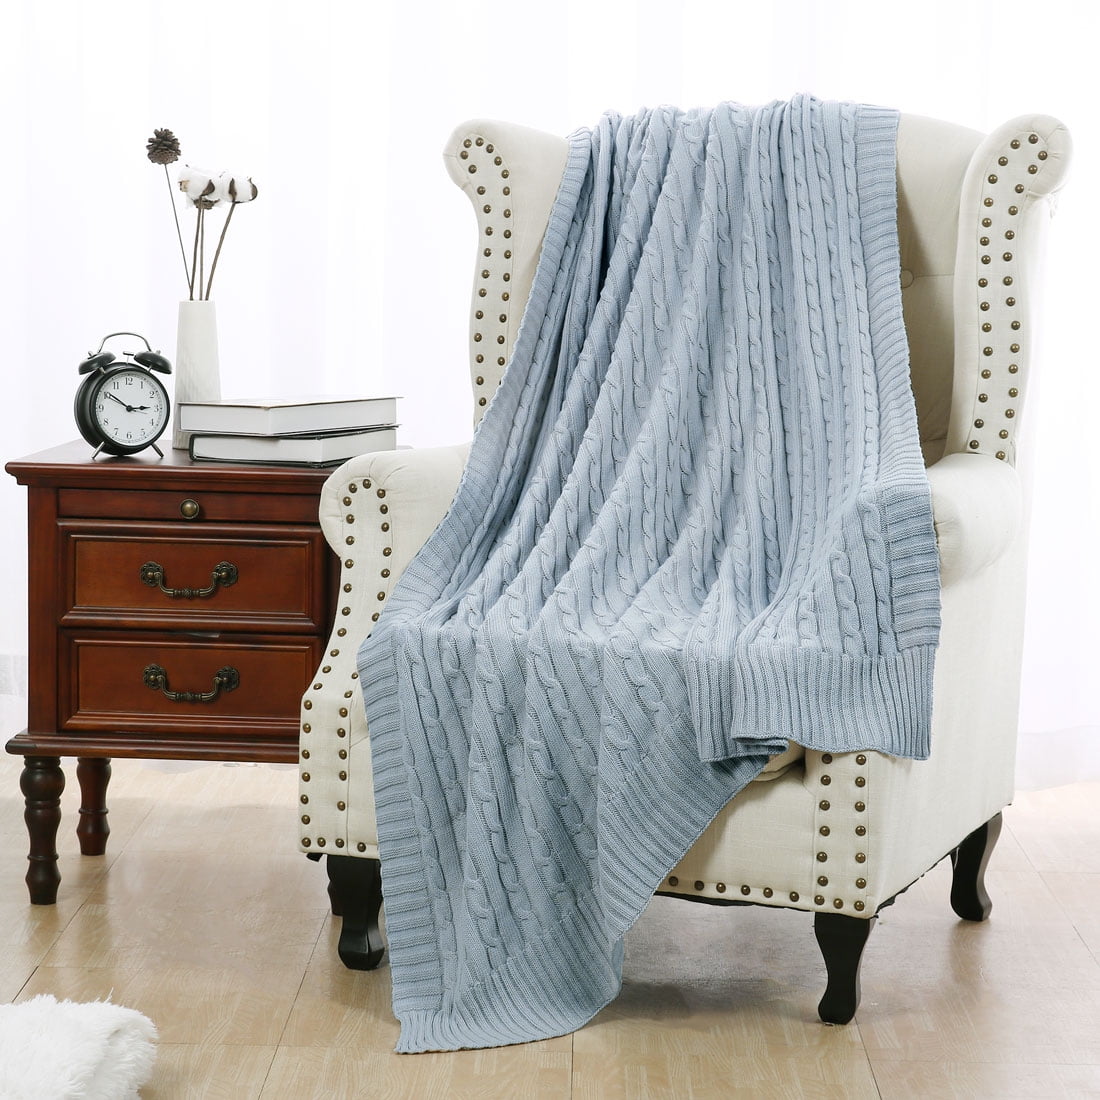 Soft Knitted Throw Blanket Bed Sofa Couch Decorative Cable Knit Pattern Washable